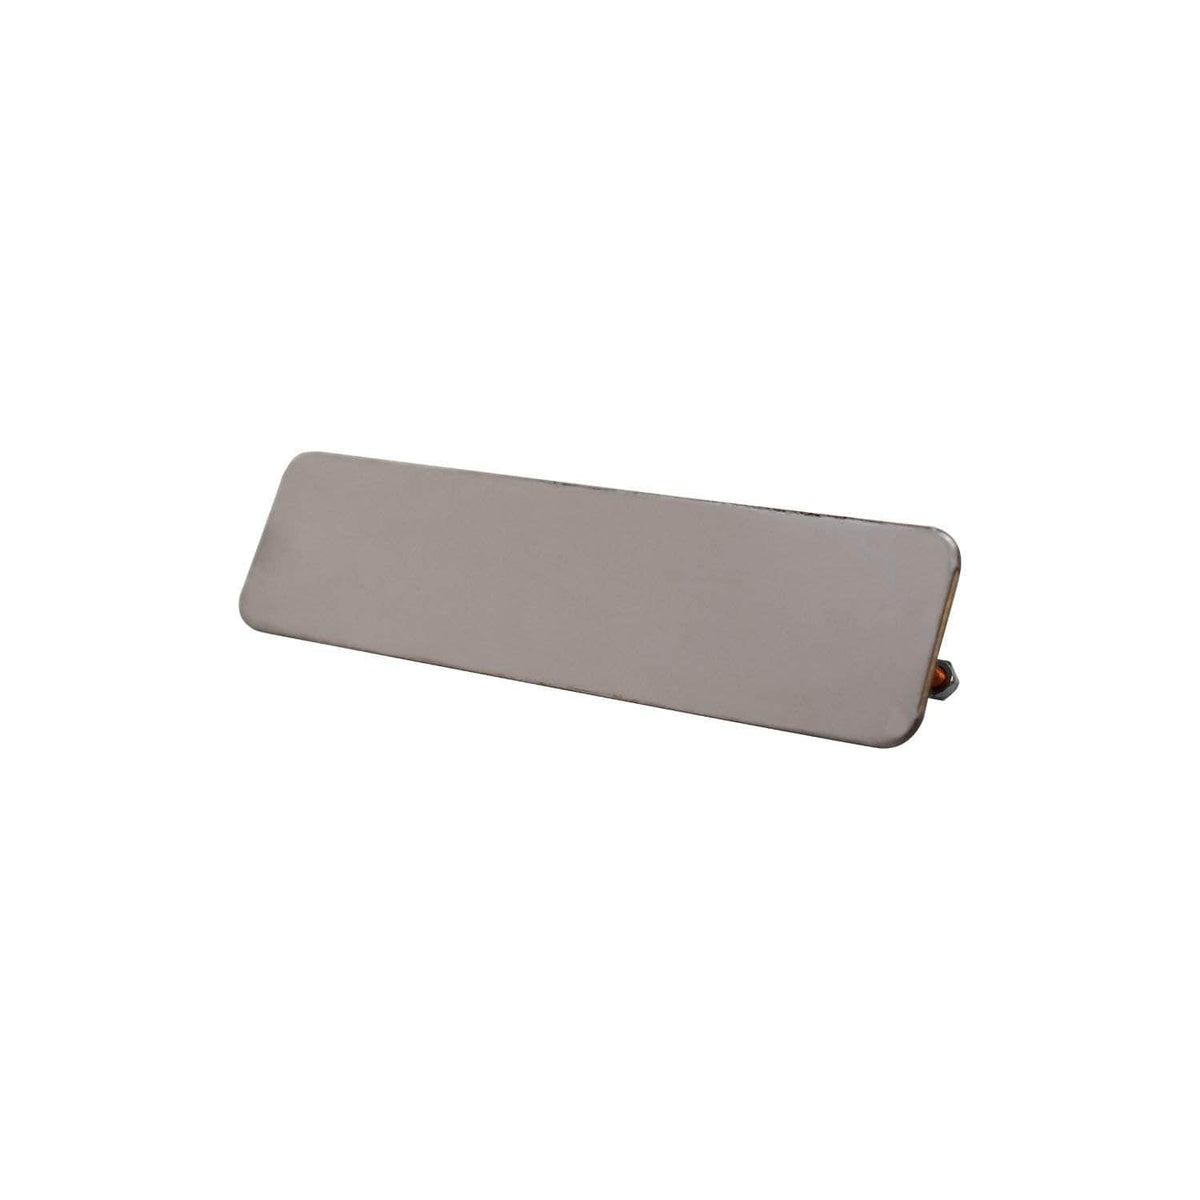 Air Wheel Blank Plate for use with &#39;Deluxe&#39; Aga range cooker